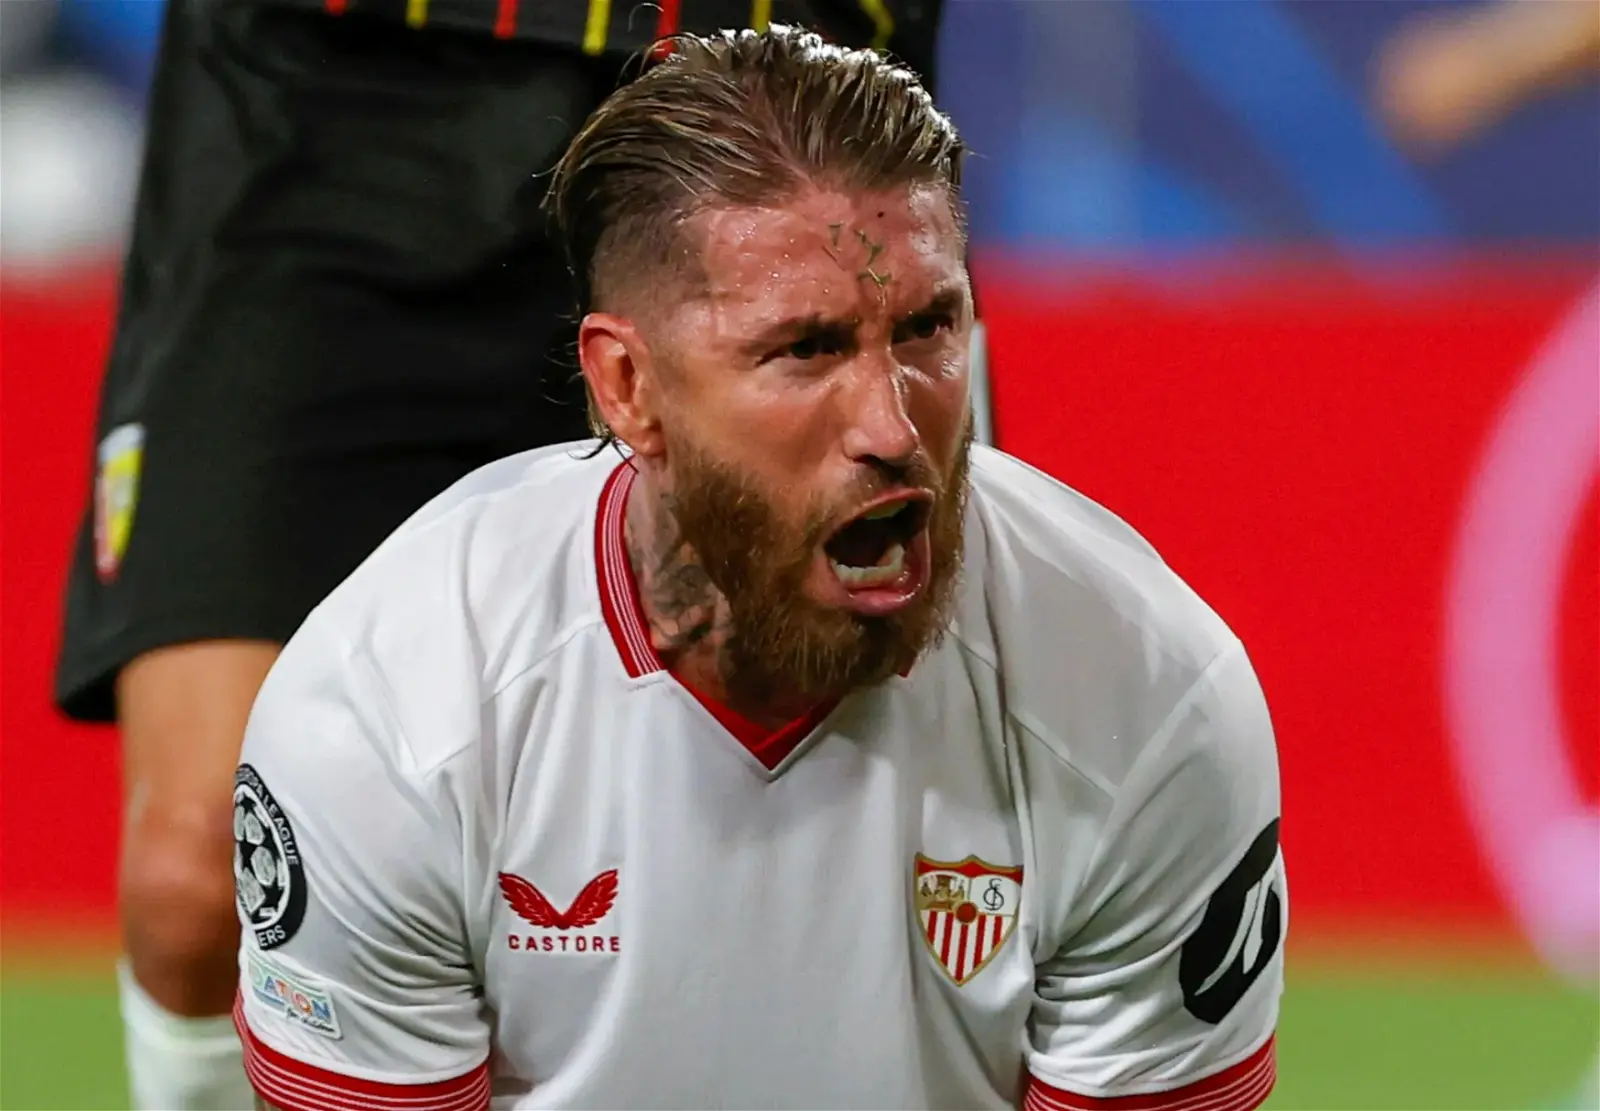 NEWS Report: Sadly Sergio Ramos missed Sevilla’s Copa del Rey match due to a calf injury…